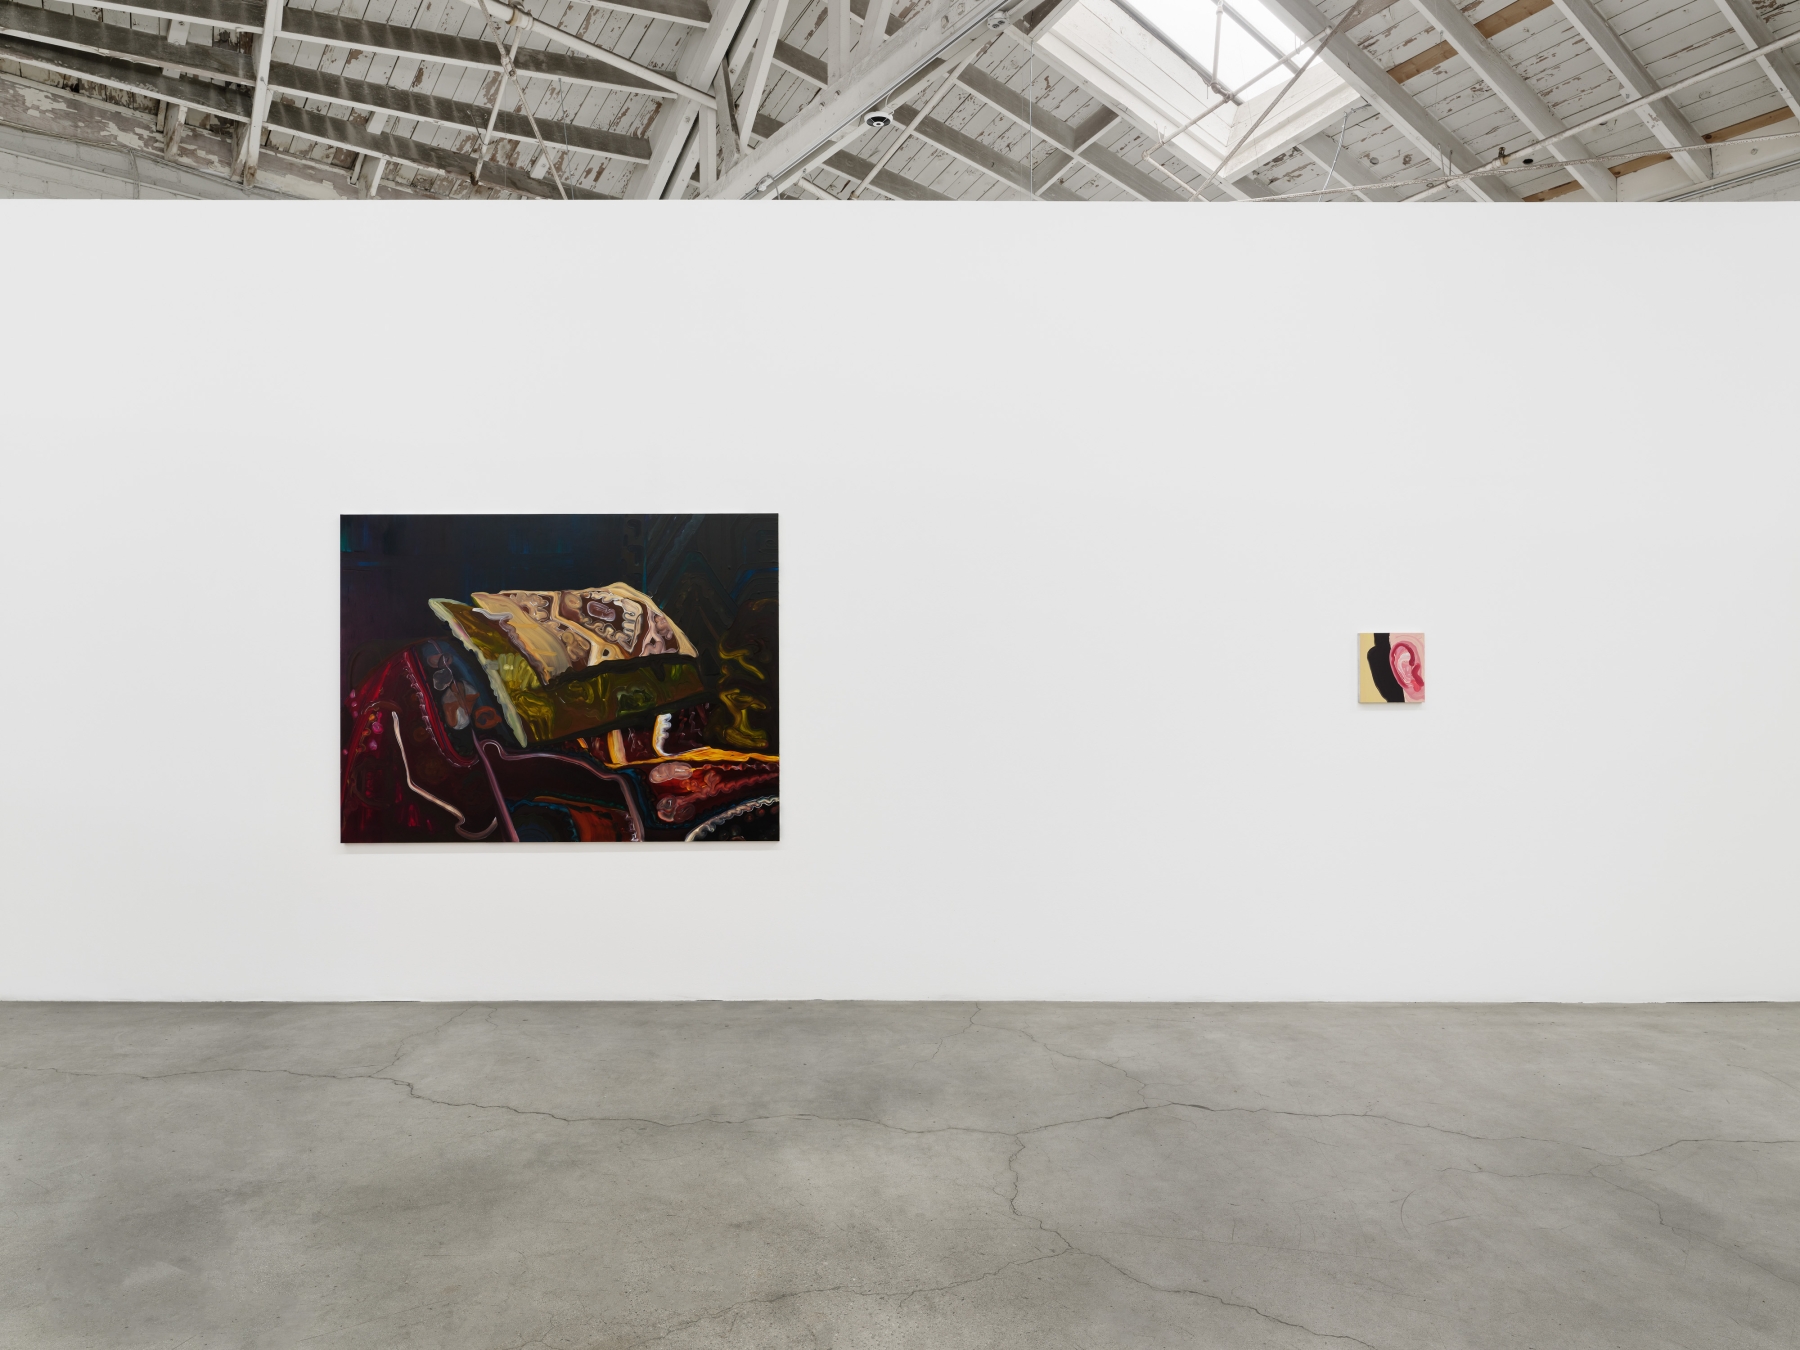 Clare Woods,&nbsp;After Limbo, installation view, 2022